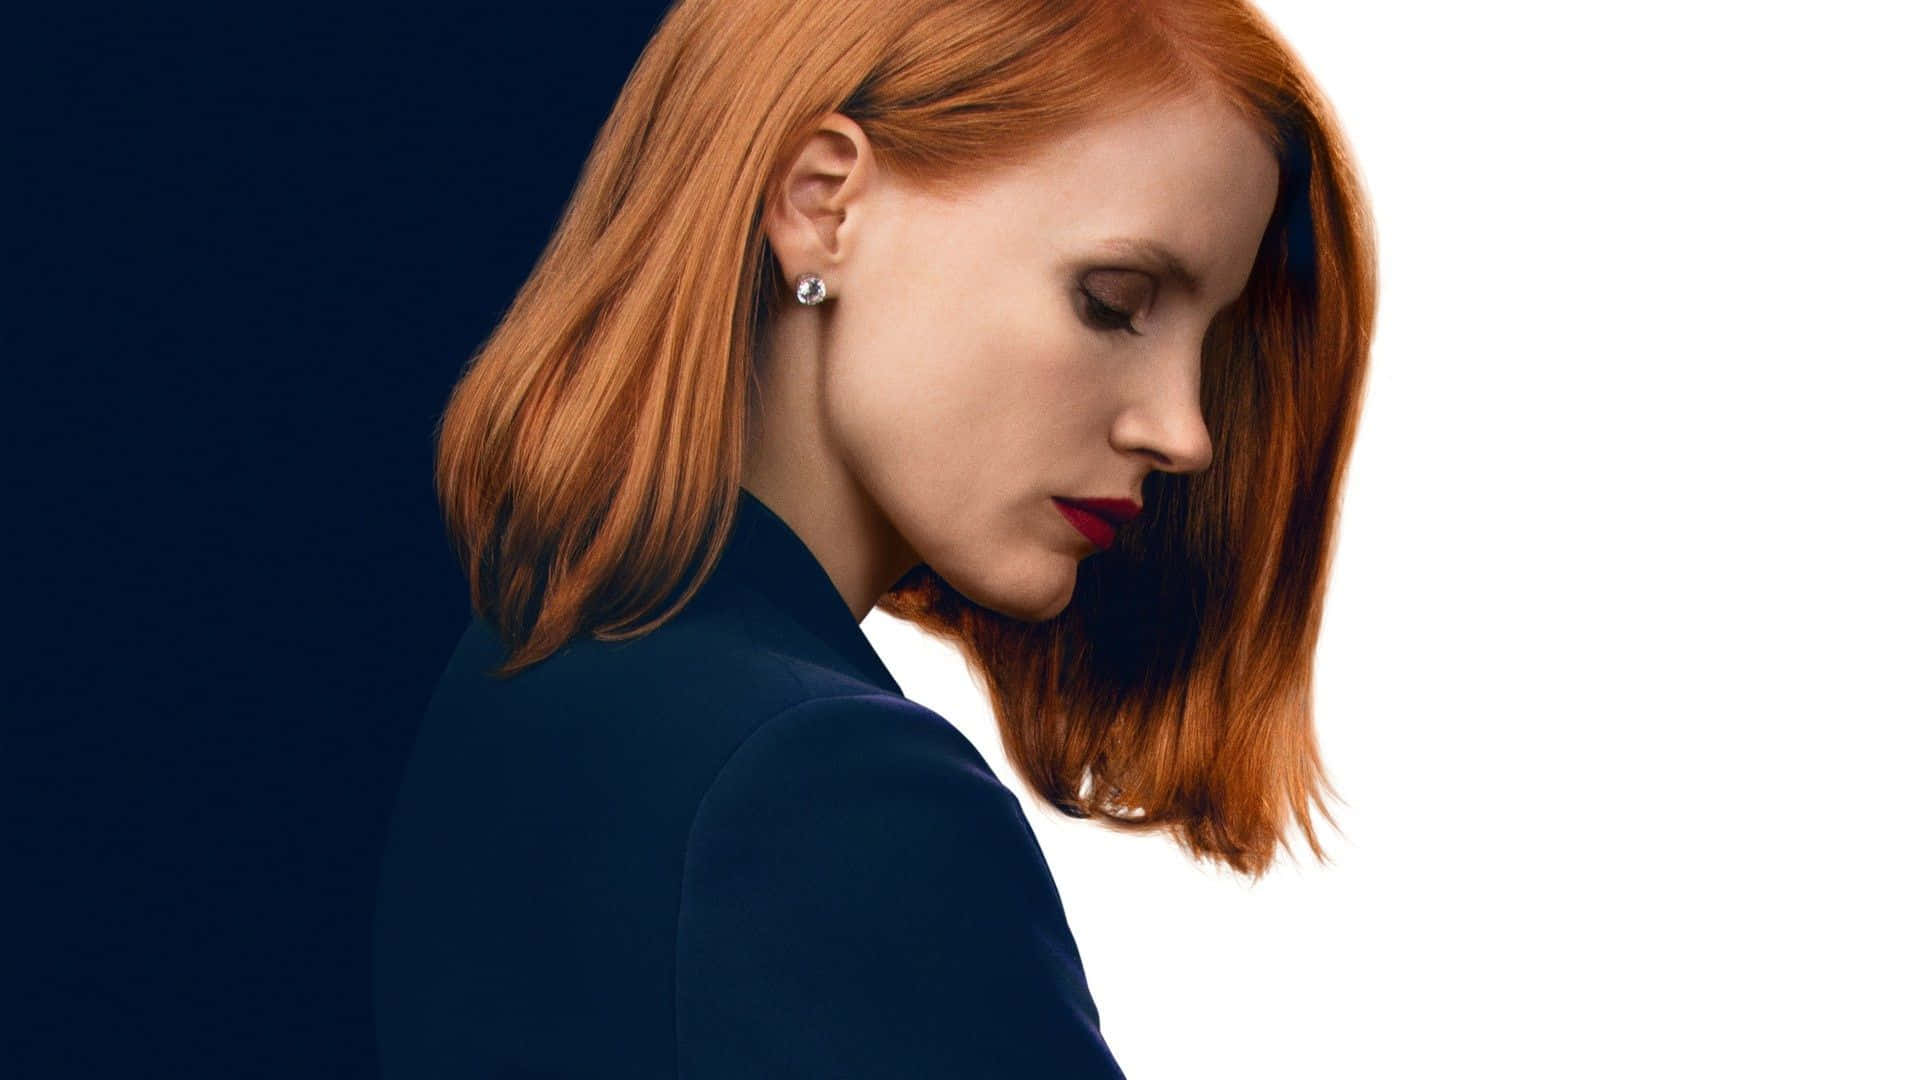 Radiant Jessica Chastain posing in a stylish outfit Wallpaper